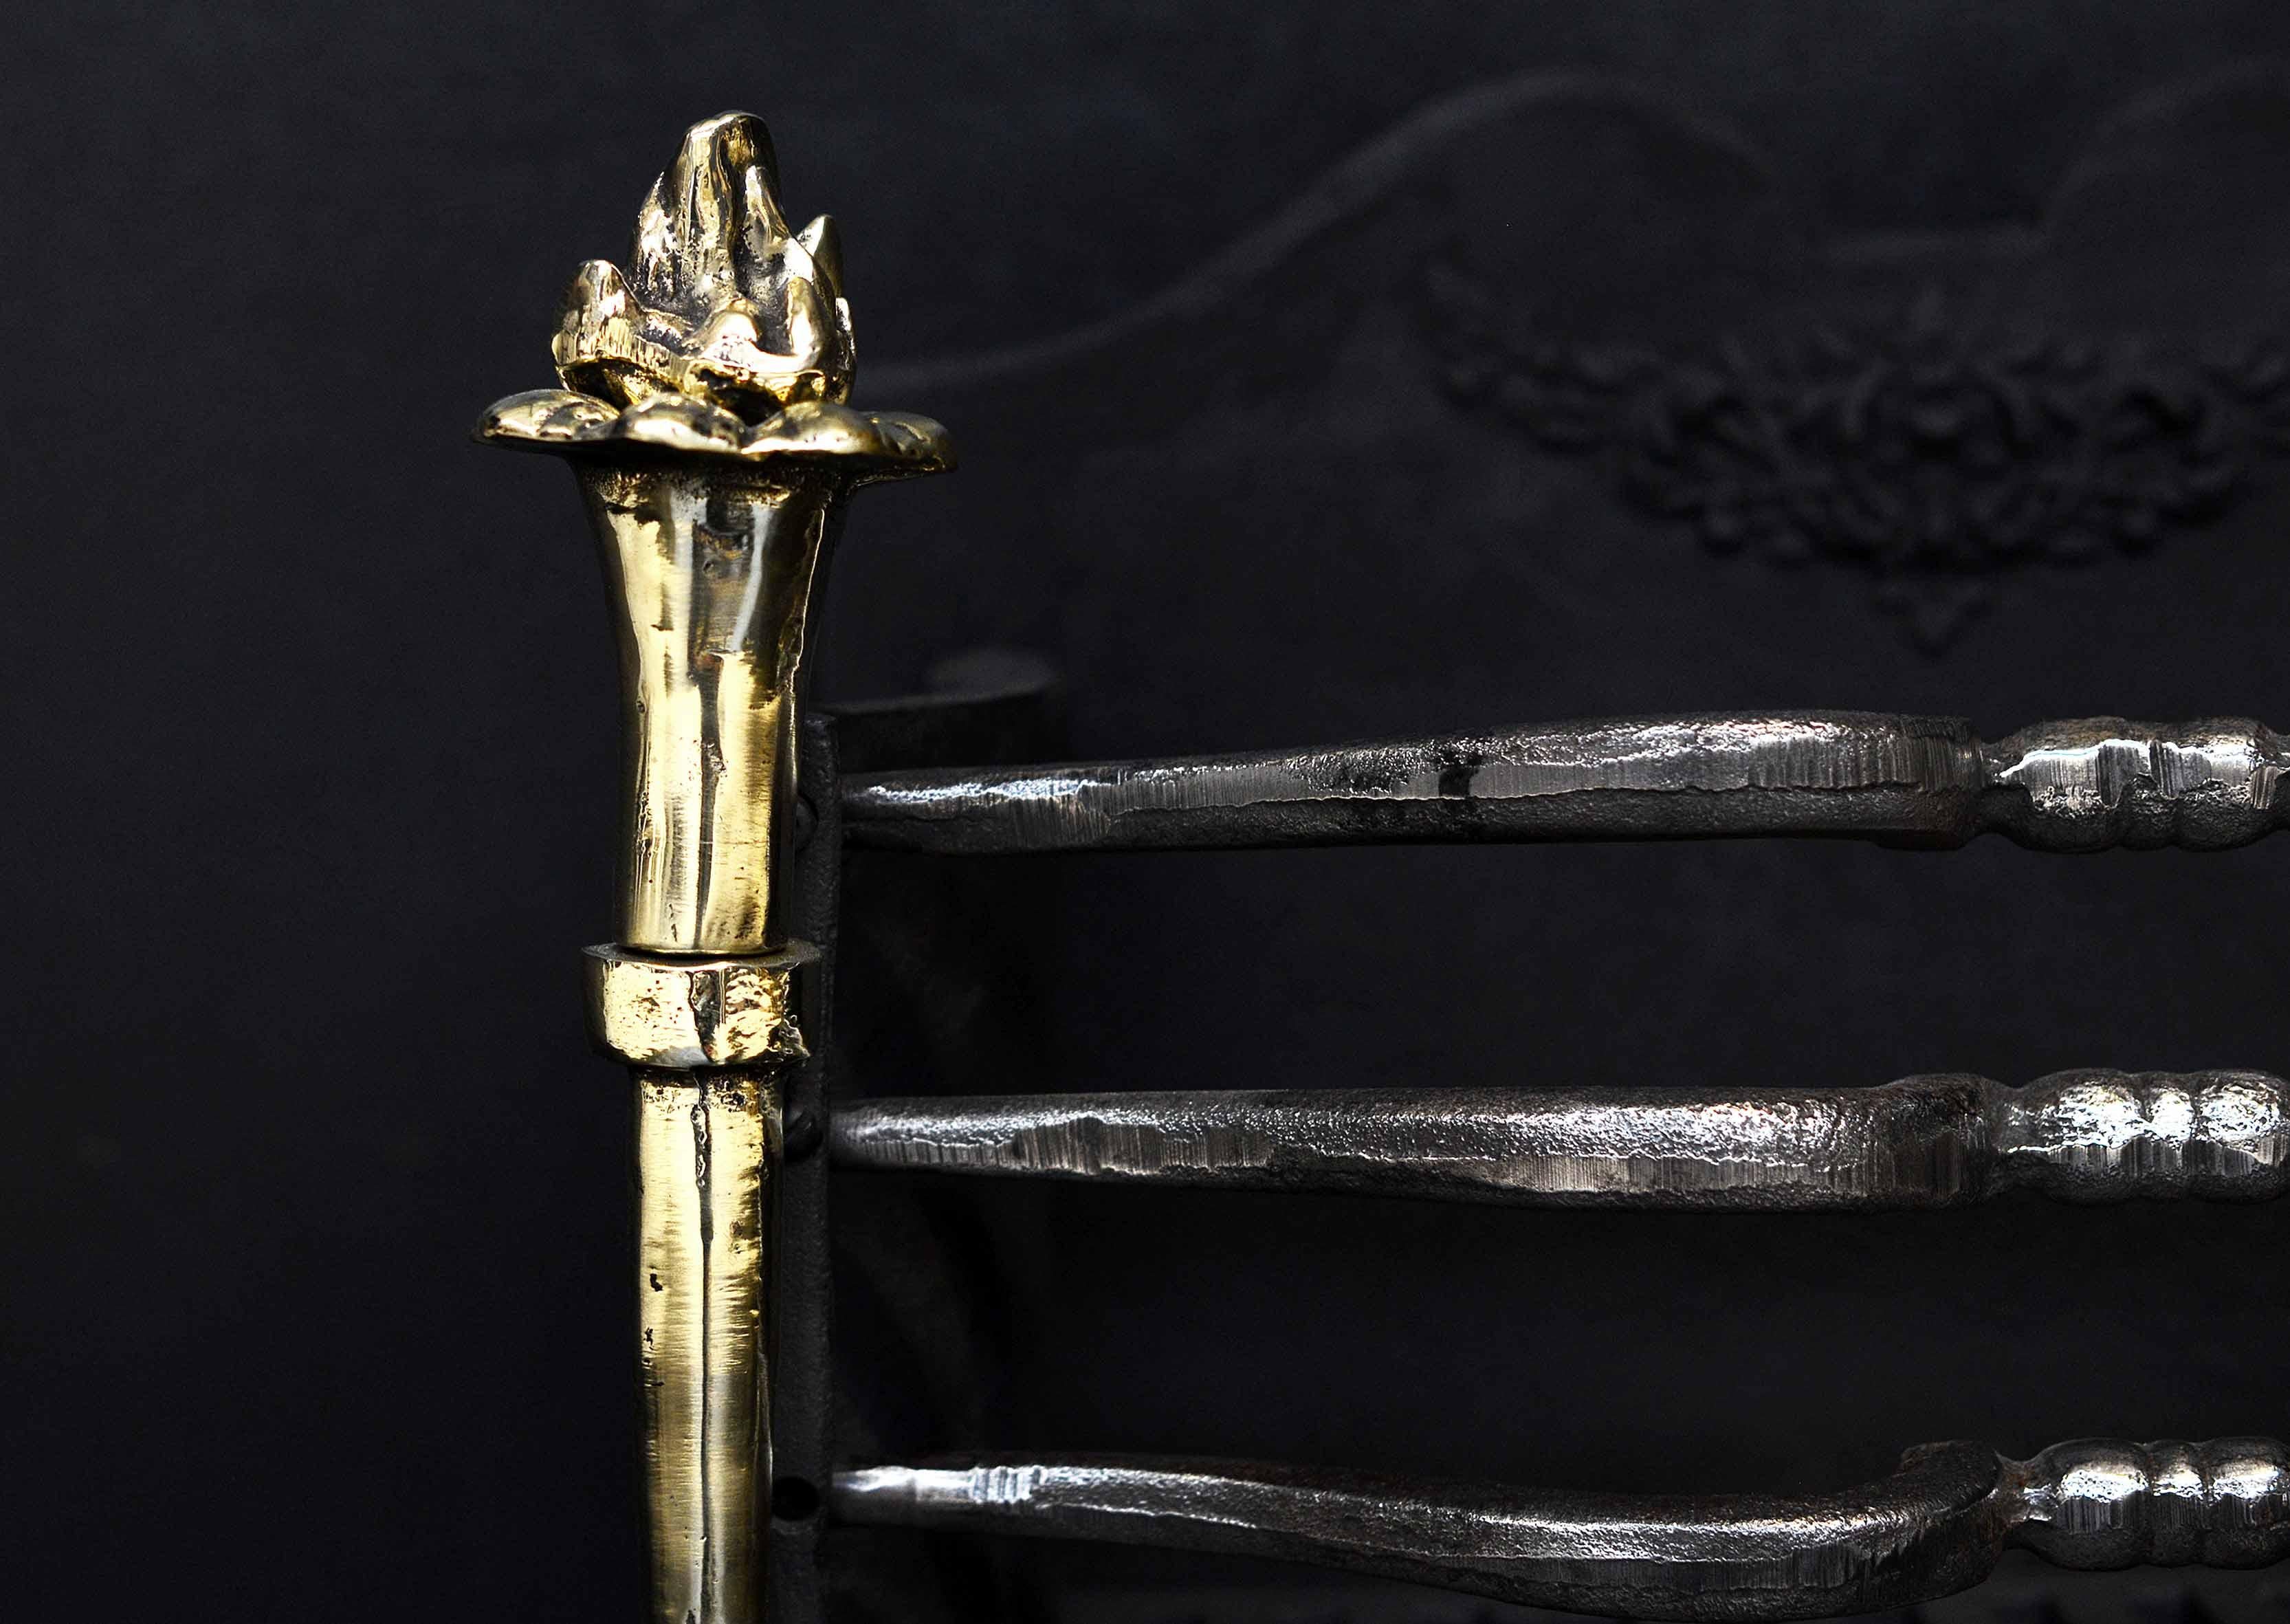 19th Century English Firegrate with Brass Torch Finials